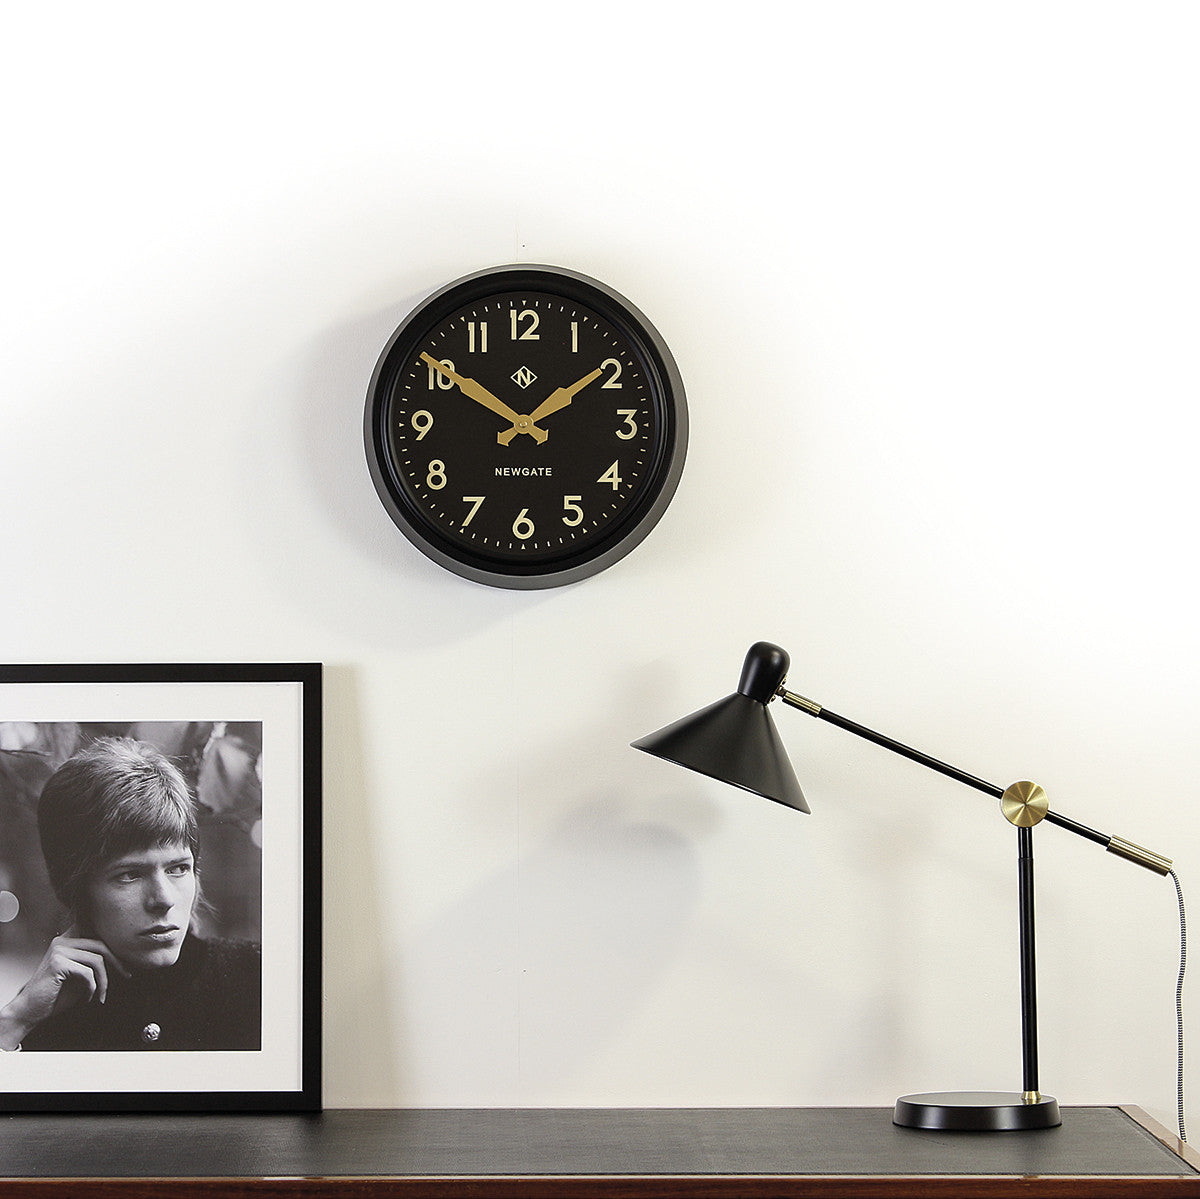 50s style electric clock - Mrs Robinson